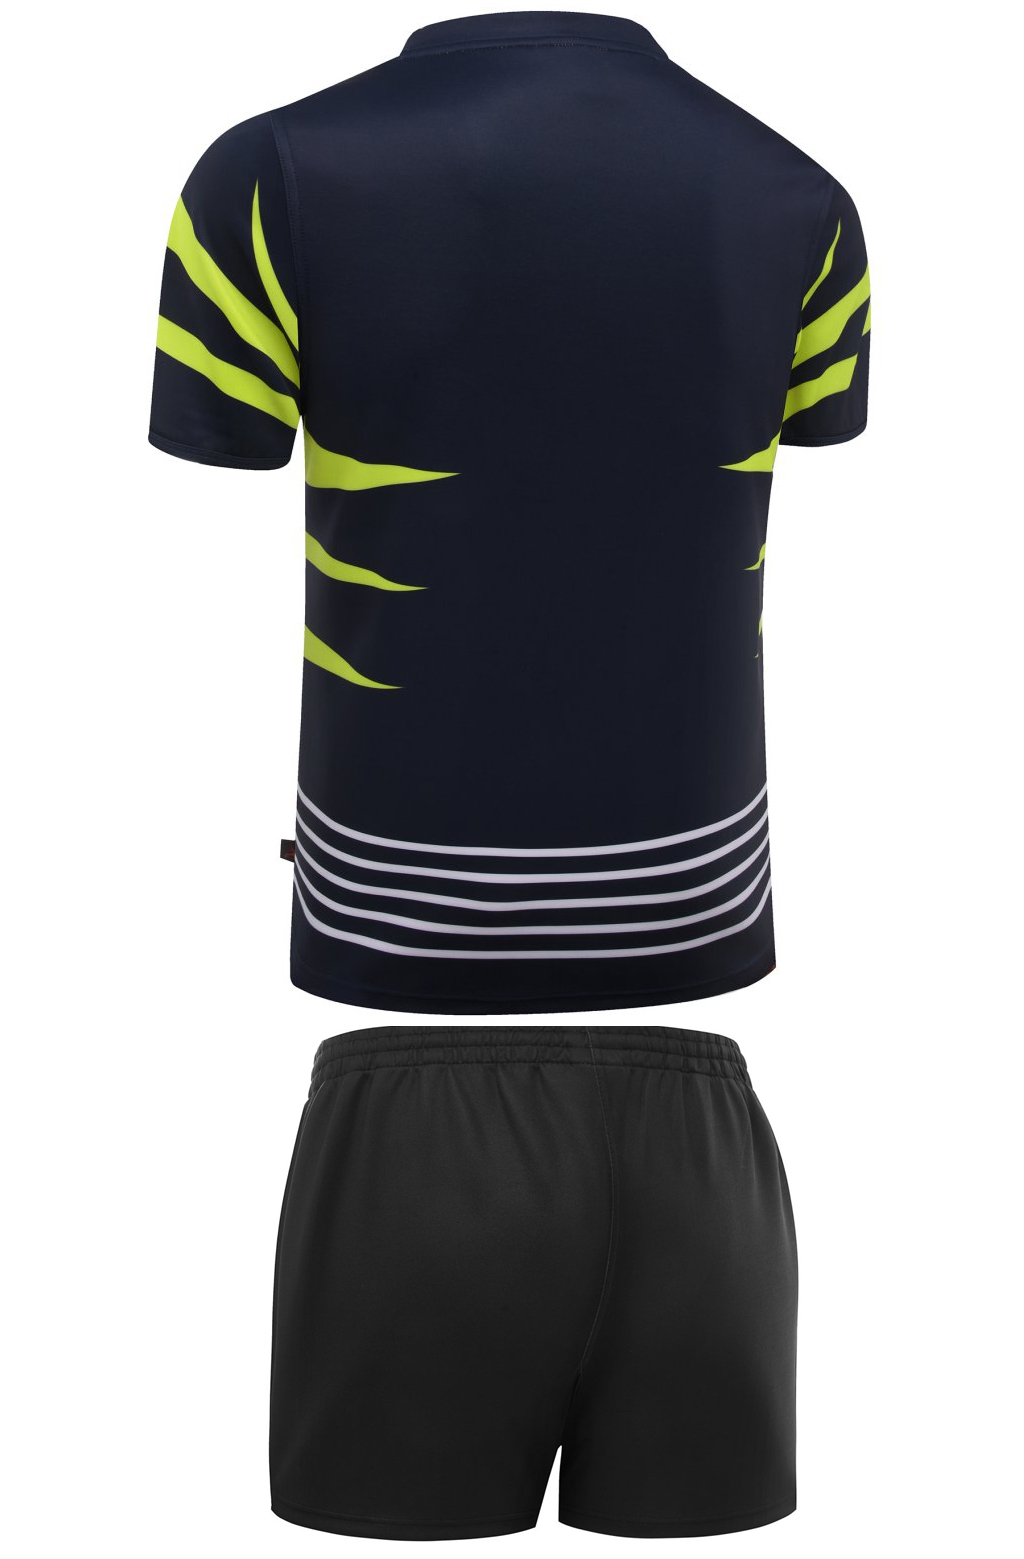 RUGBY SEVENS TEAM WEAR-PLAYER FIT-R1112NBG